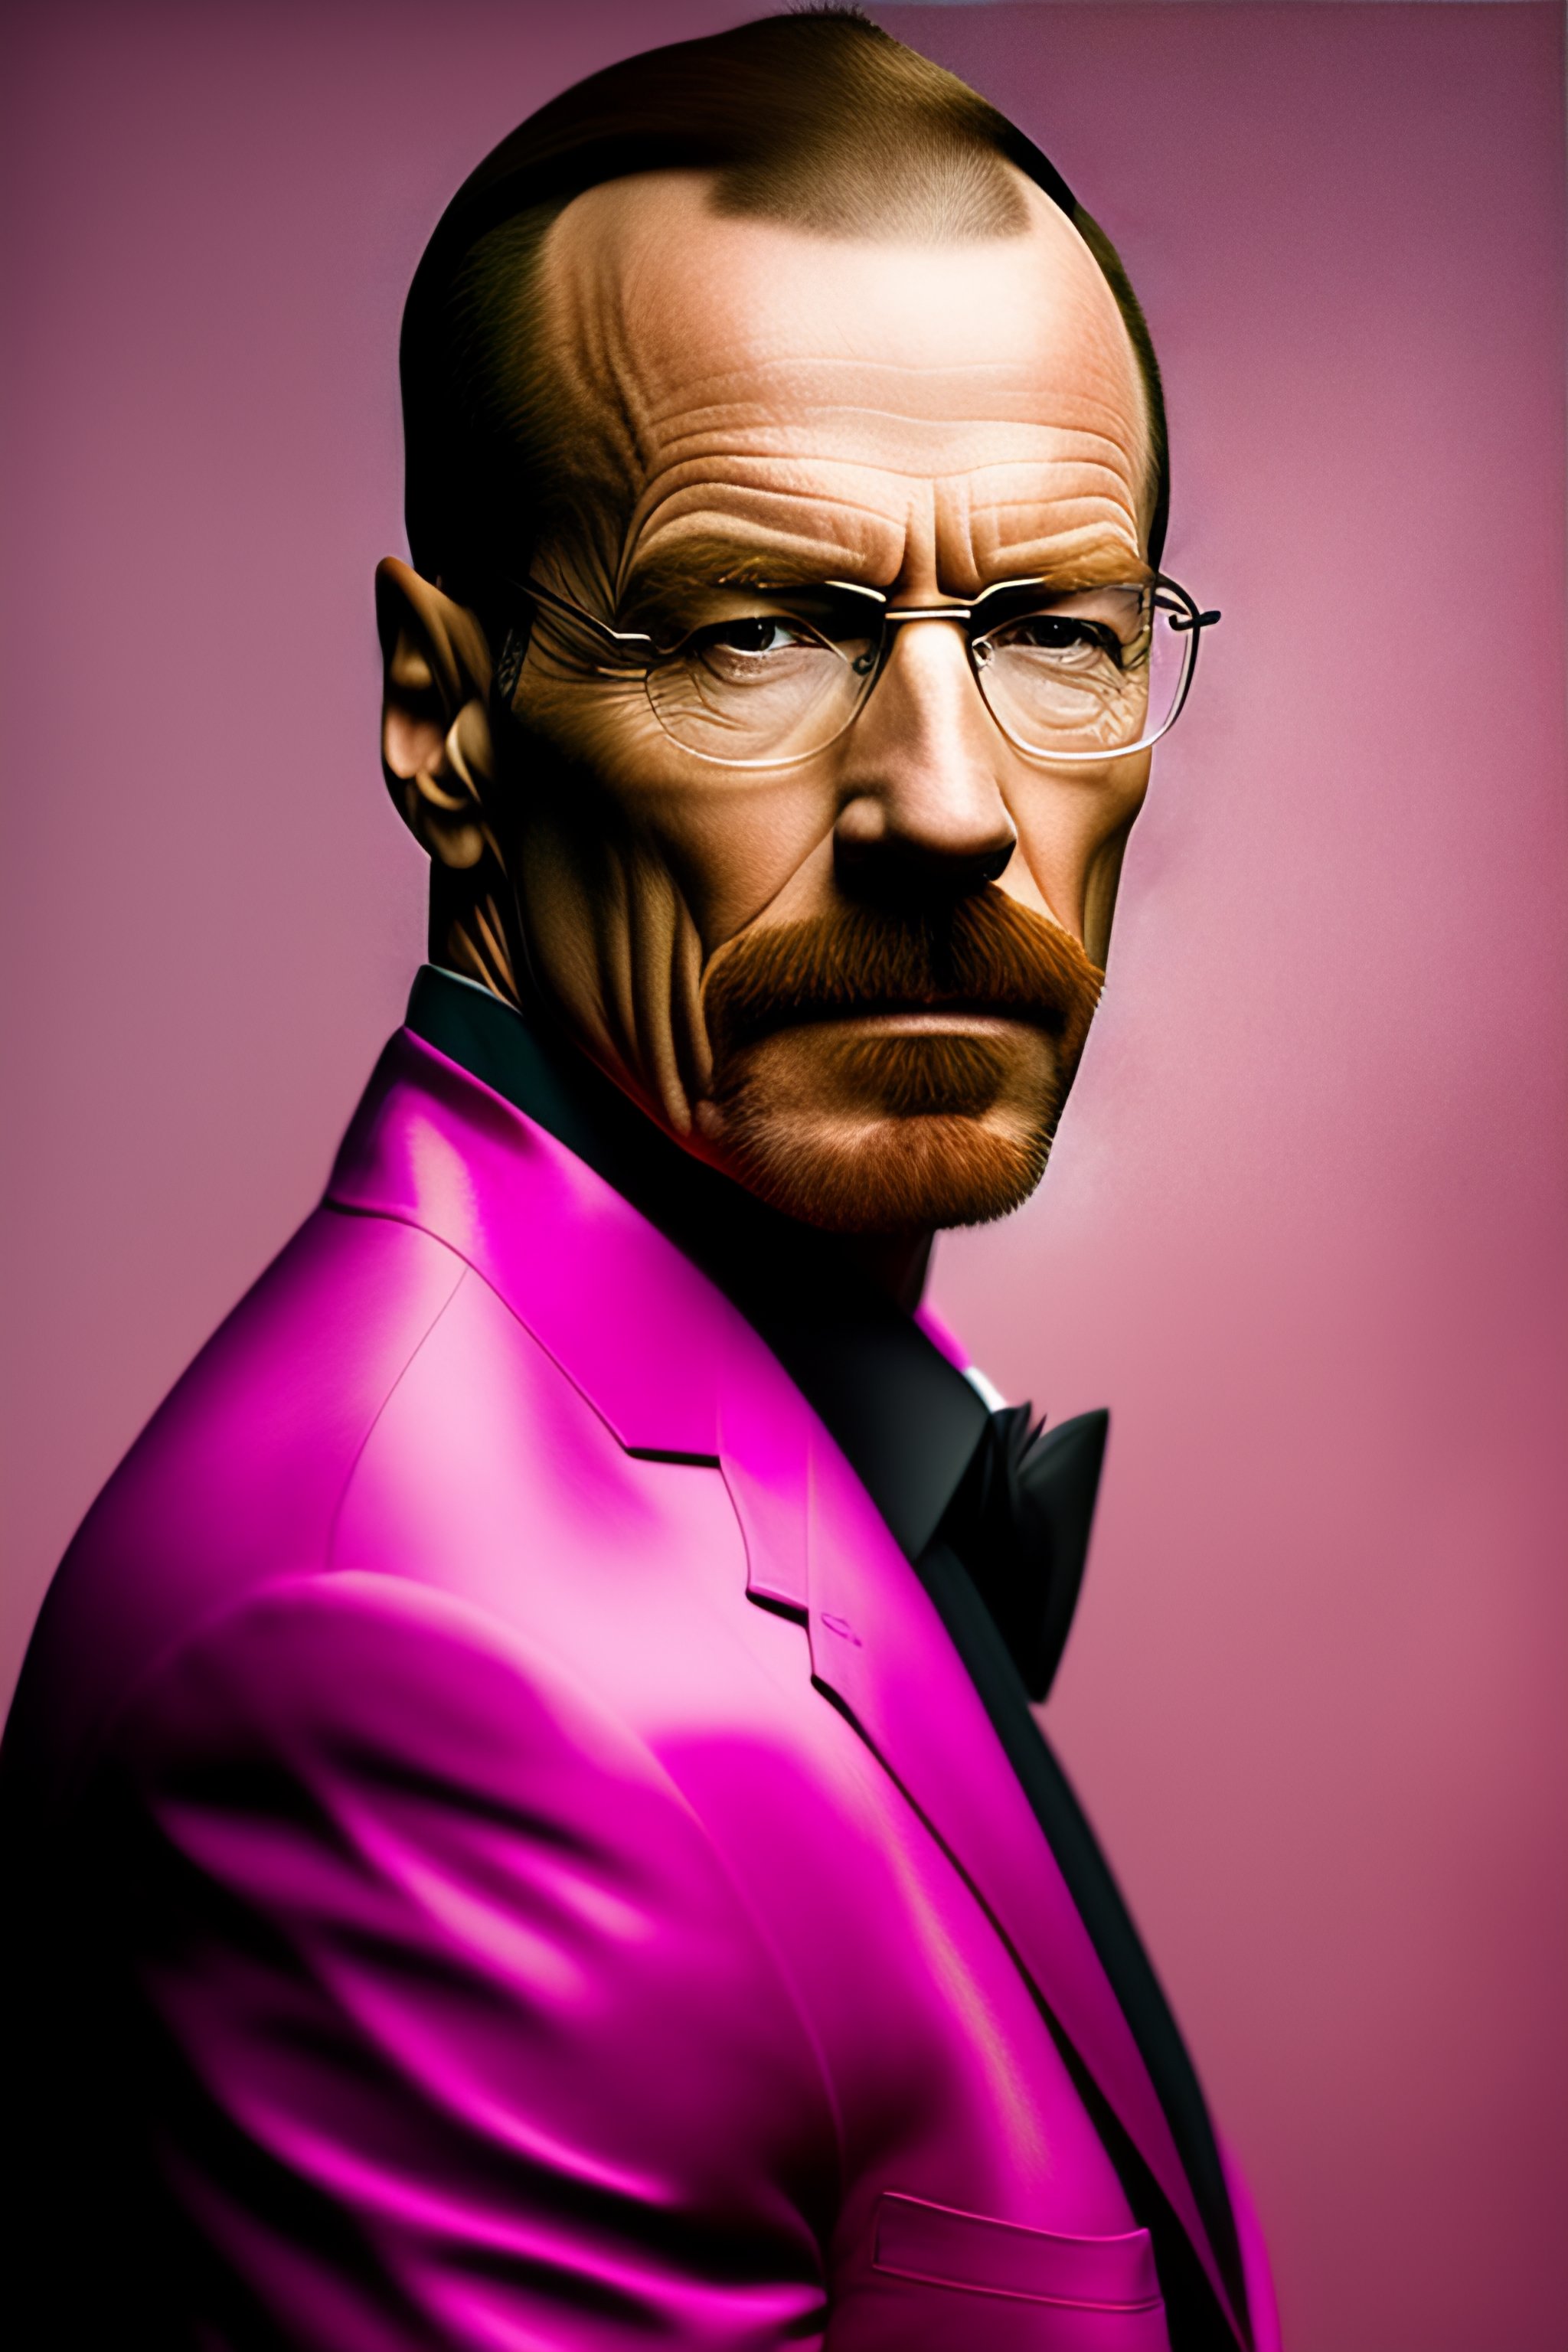 Lexica - A photo of walter white wearing a pink dress